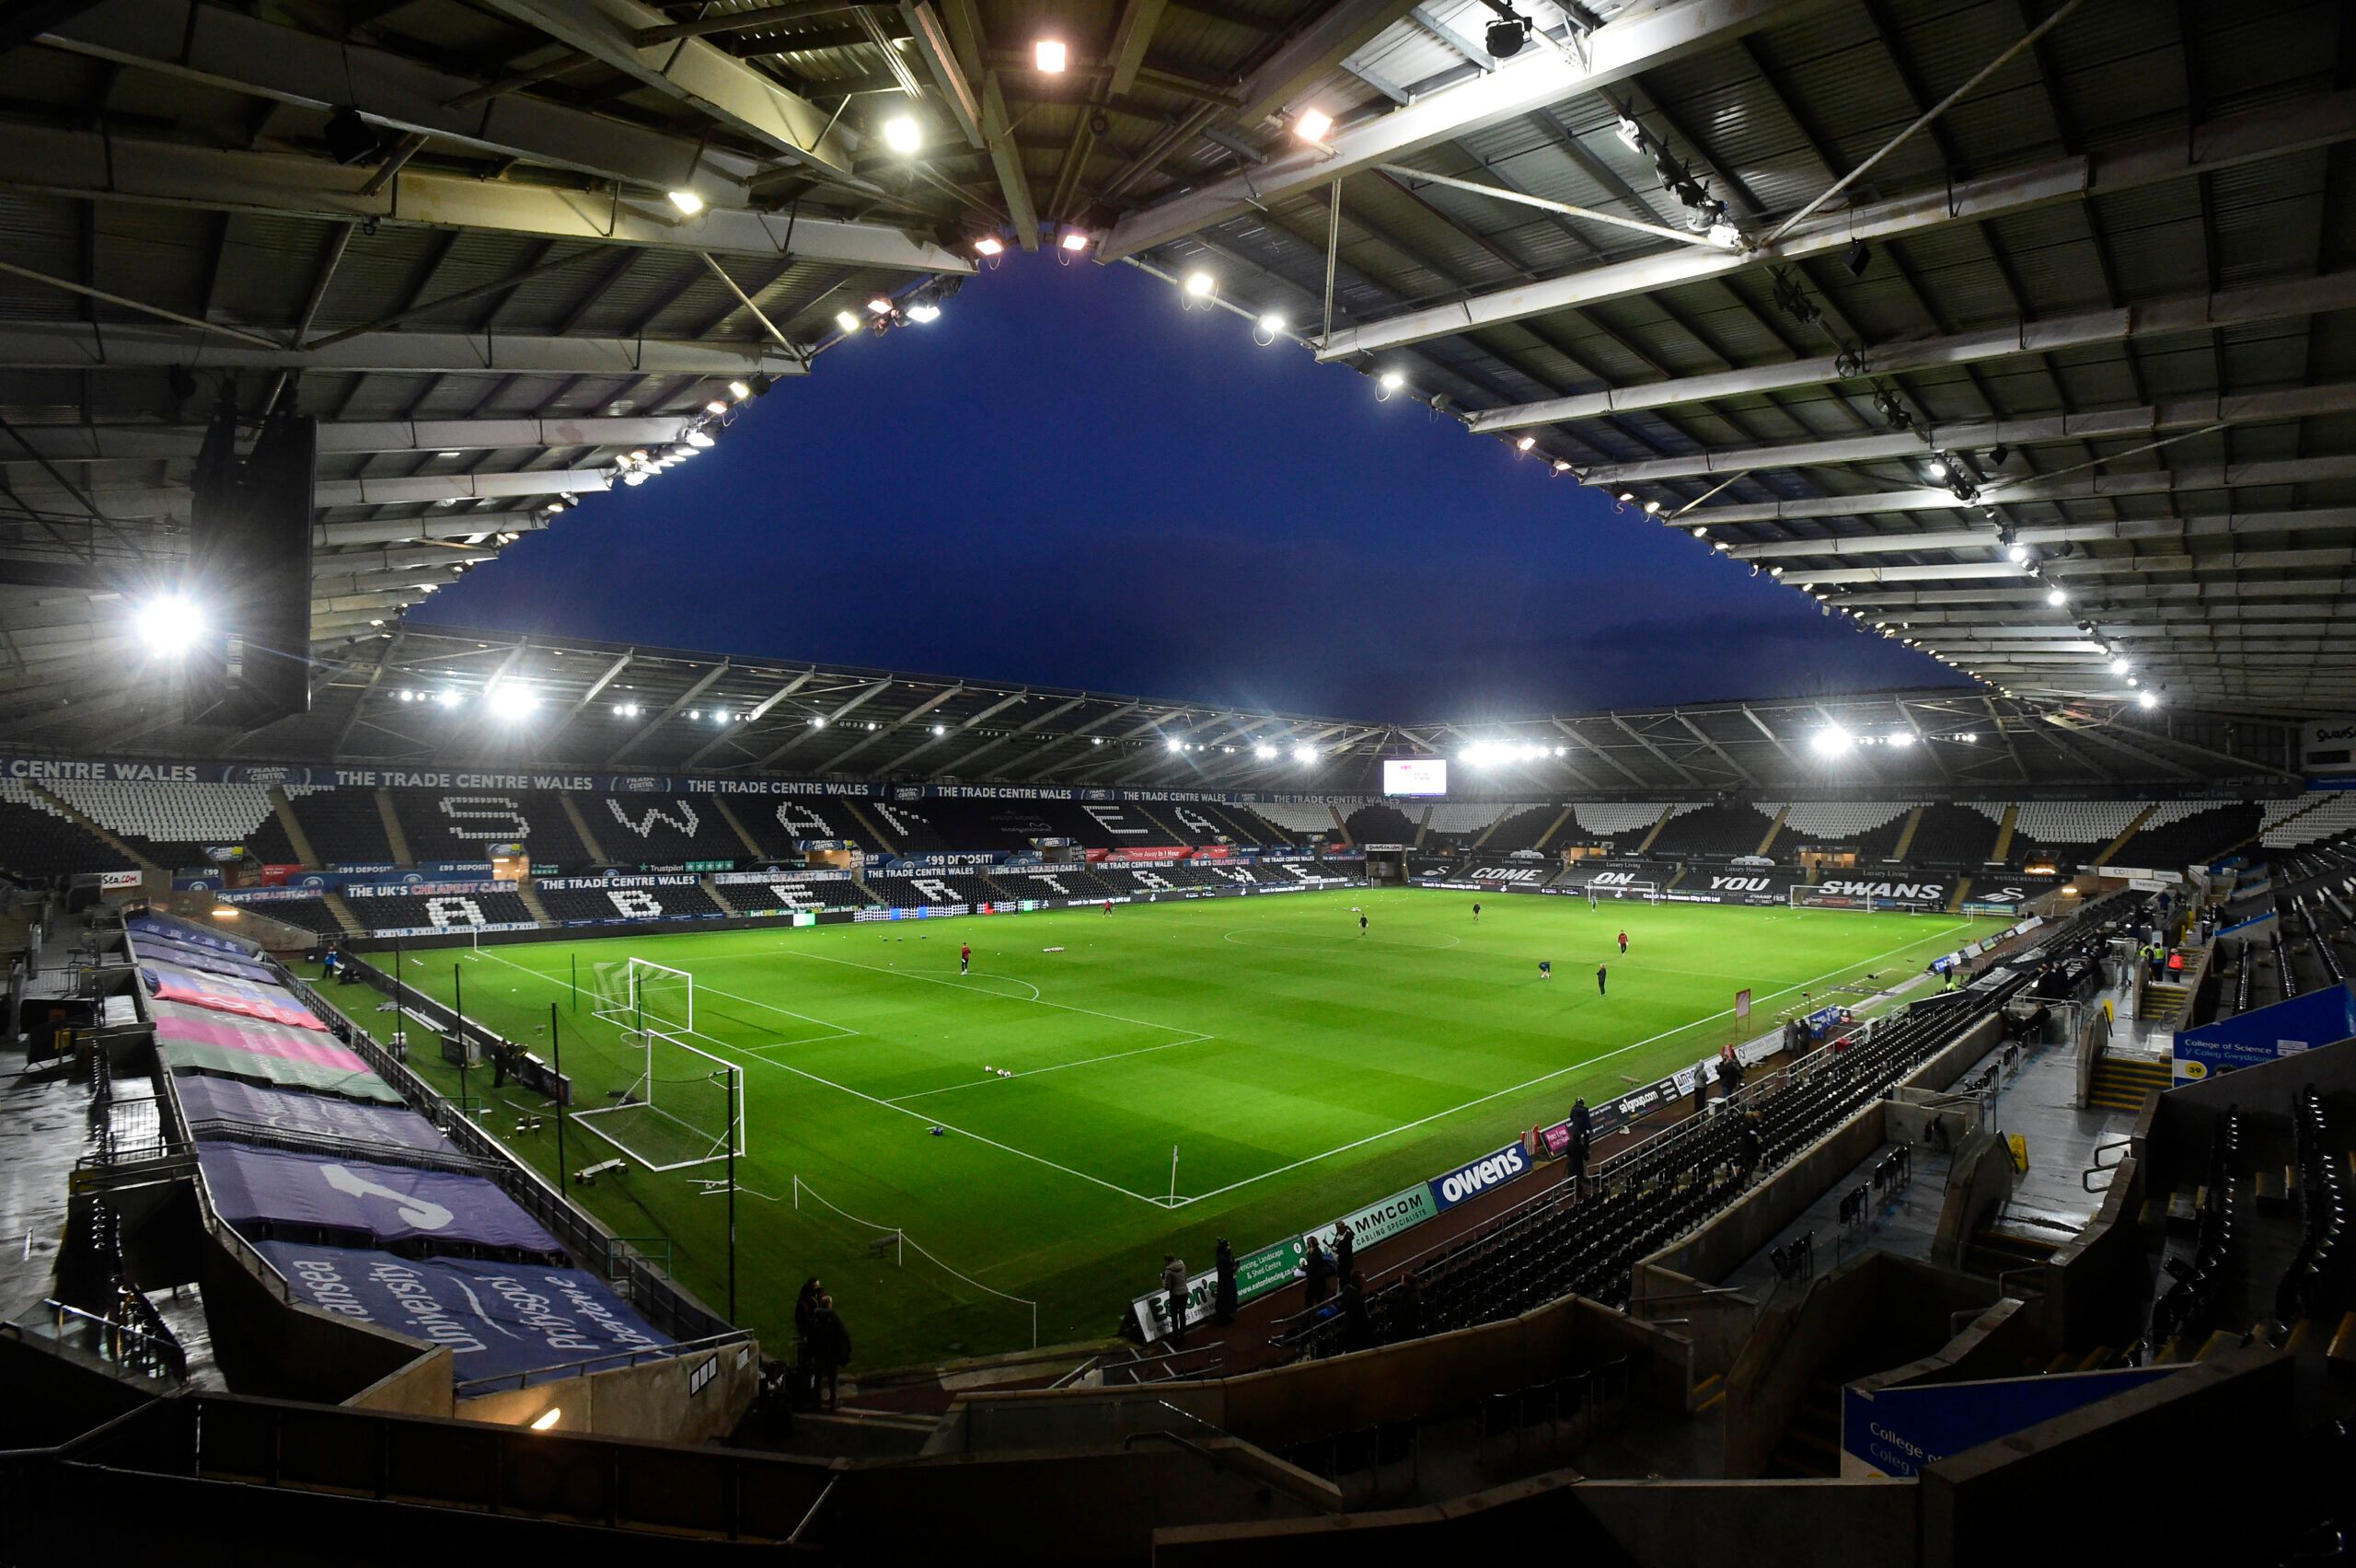 Soccer Football - FA Cup Third Round - Swansea City v Southampton - Swansea.com Stadium, Swansea, Wales, Britain - January 8, 2022 General view inside the stadium before the match REUTERS/Rebecca Naden